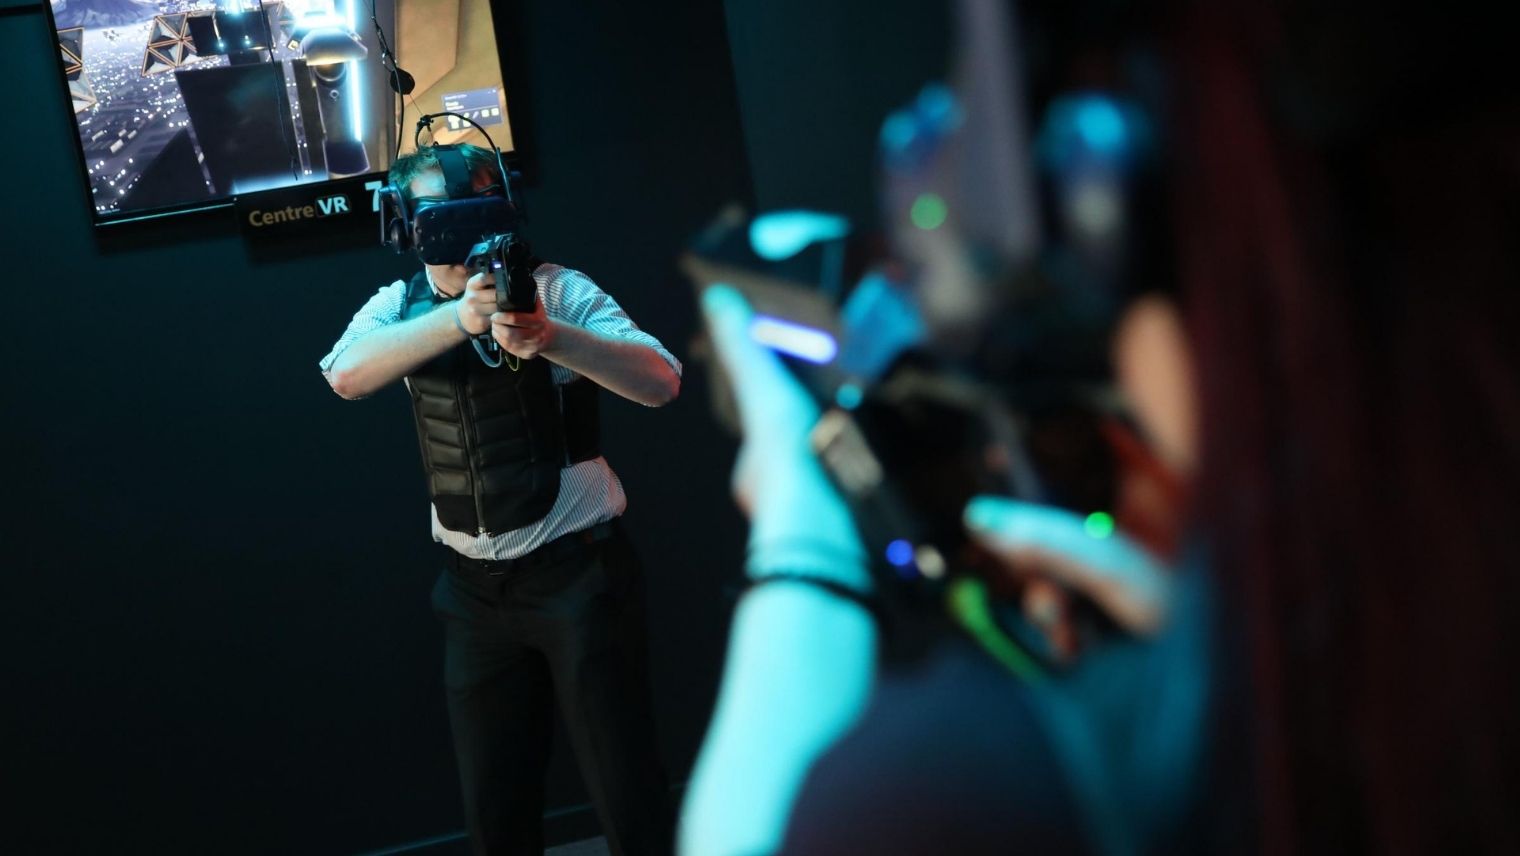 Users playing with VR equipment at CentreVR, Bournemouth